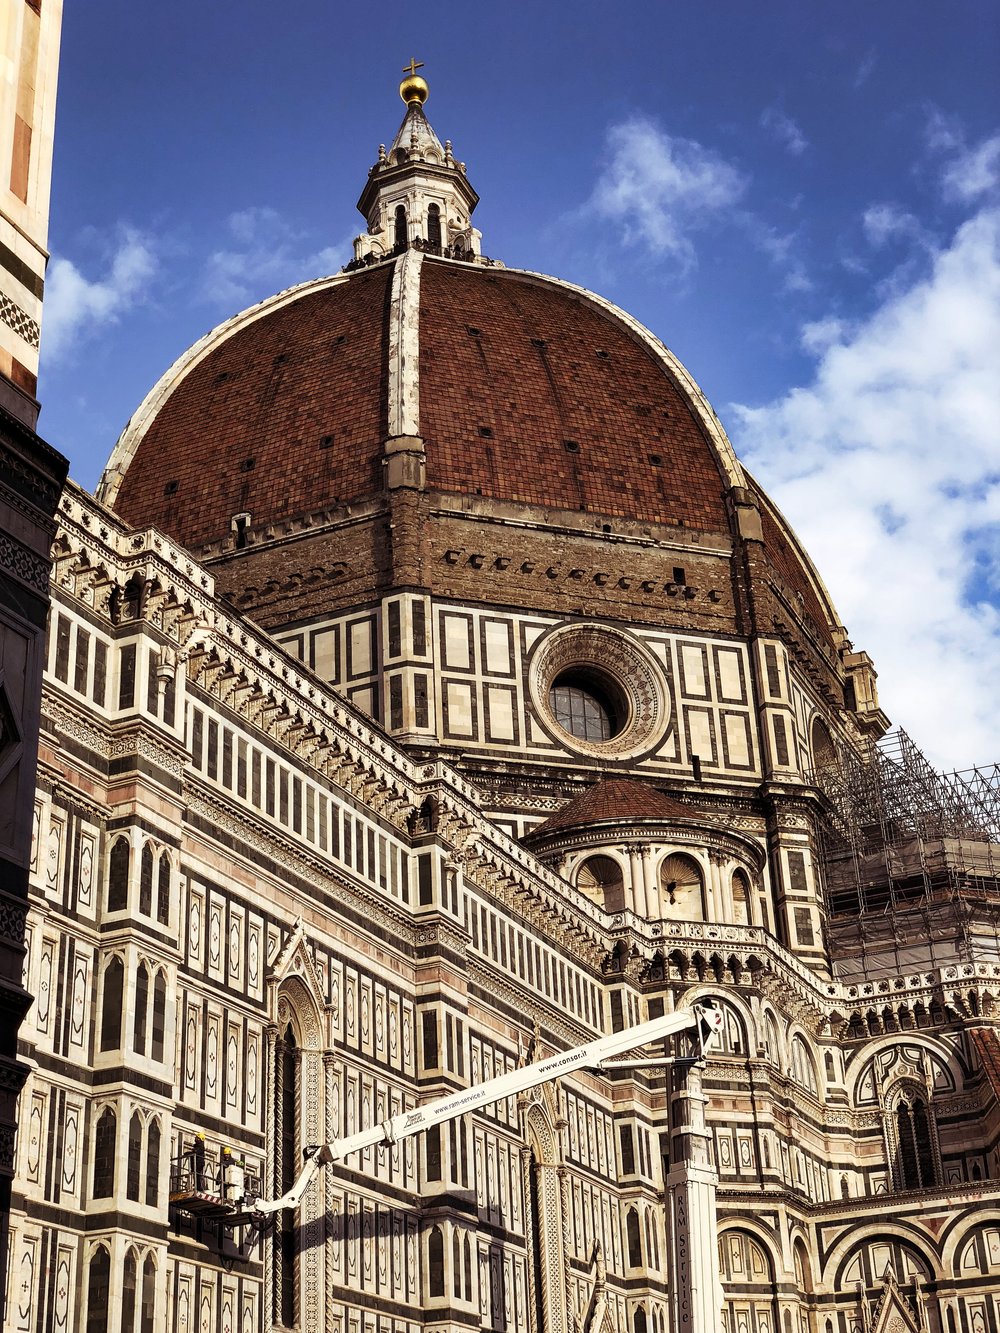 More posts in progress, just like maintaining the Duomo.